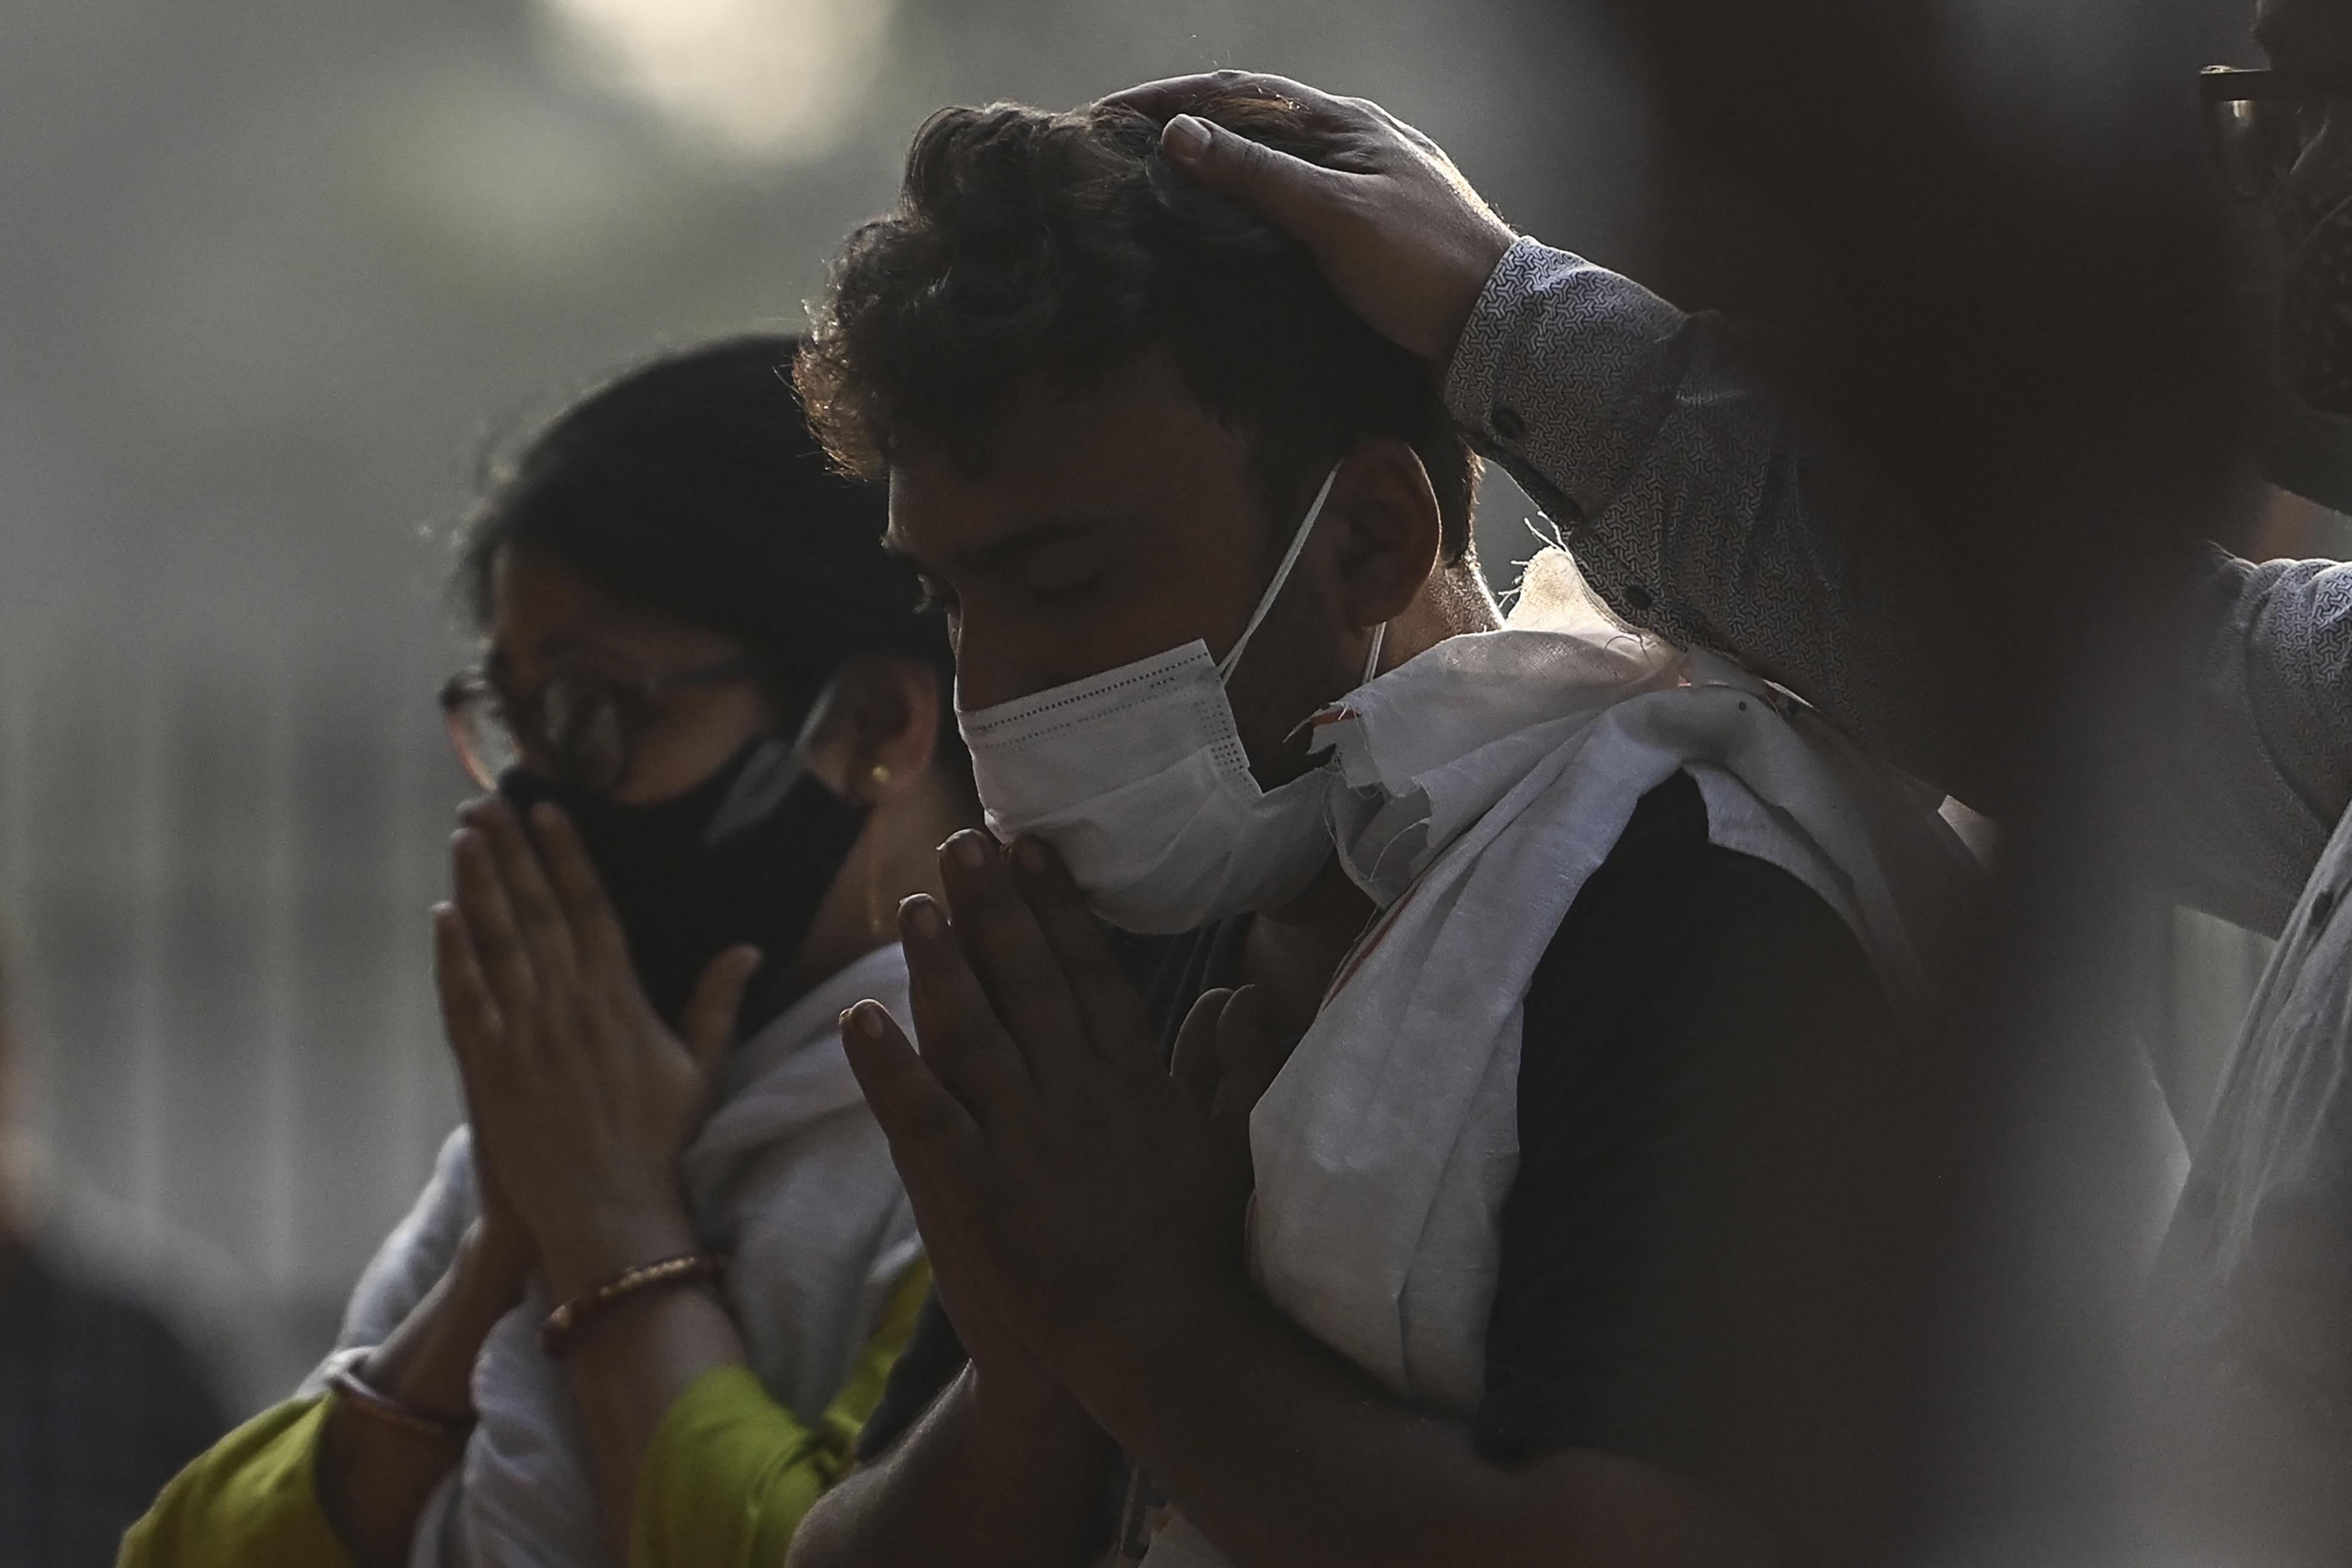 A man and a woman, both wearing masks, hold their hands in prayer to their mouths.